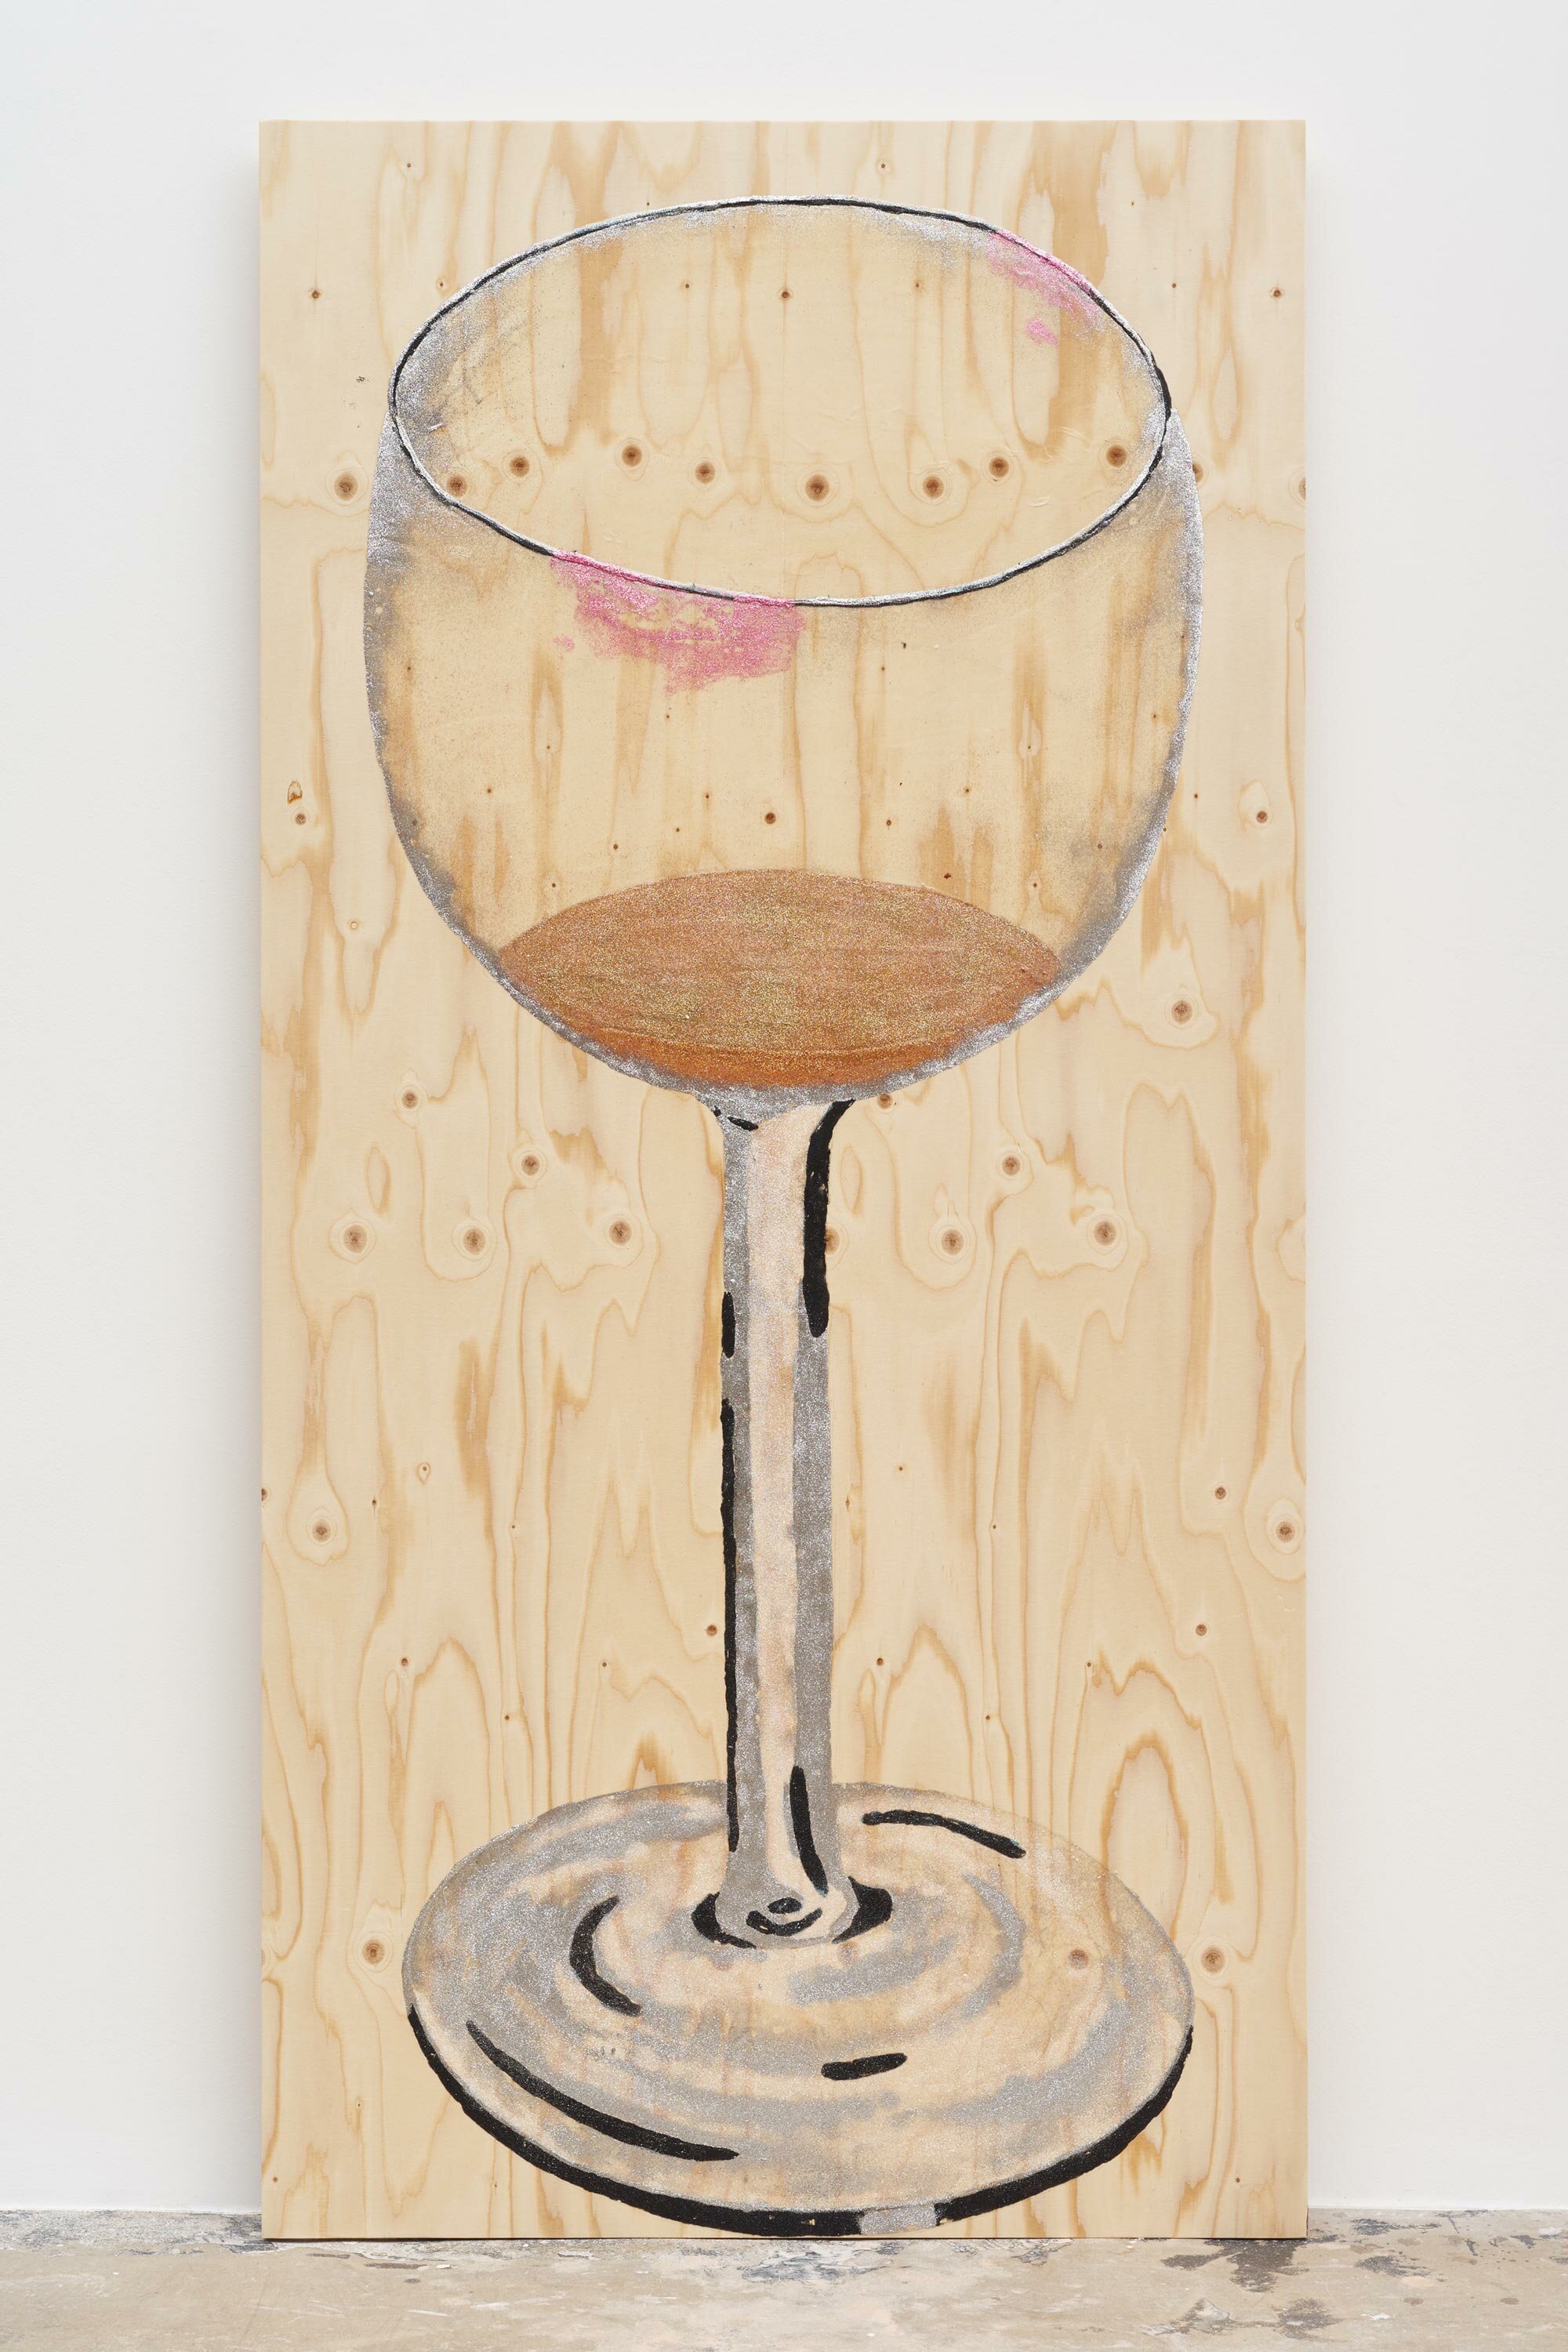 Gina Fischli, Taste the Difference (I Never Could), 2021